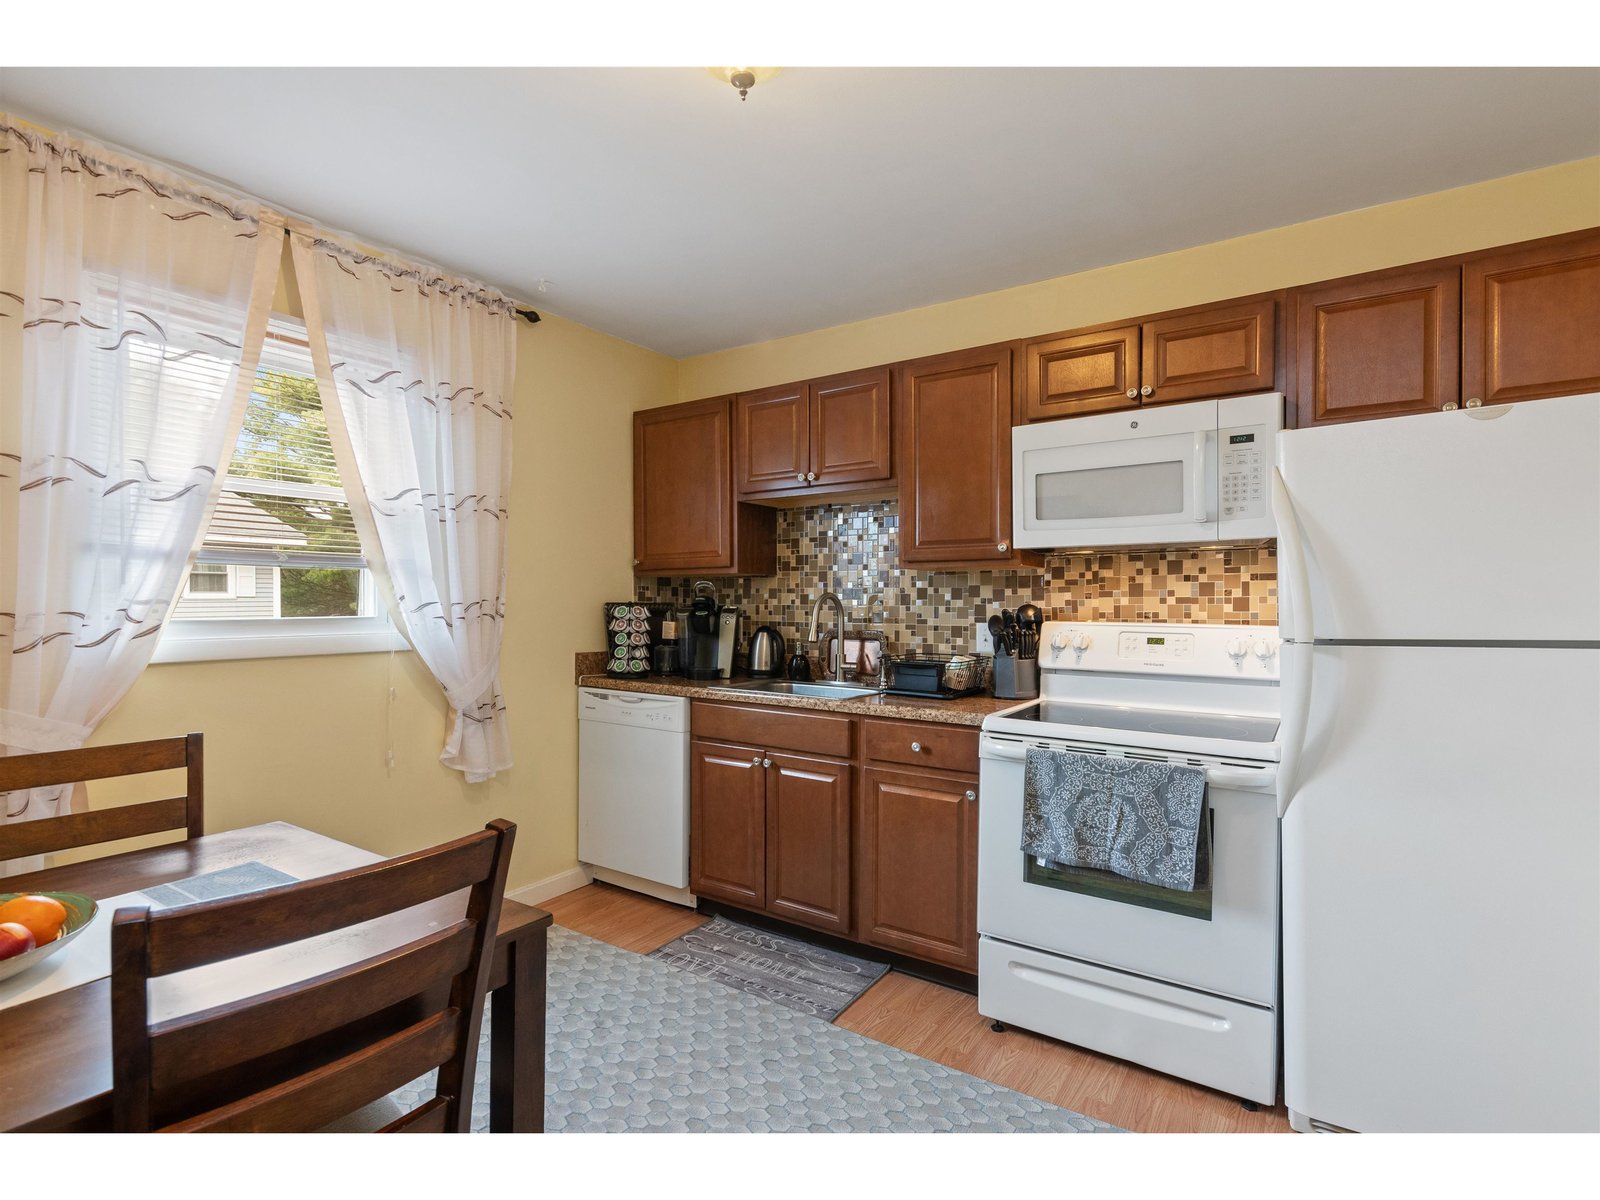 Eat-in kitchen with direct access to the back stairwell.